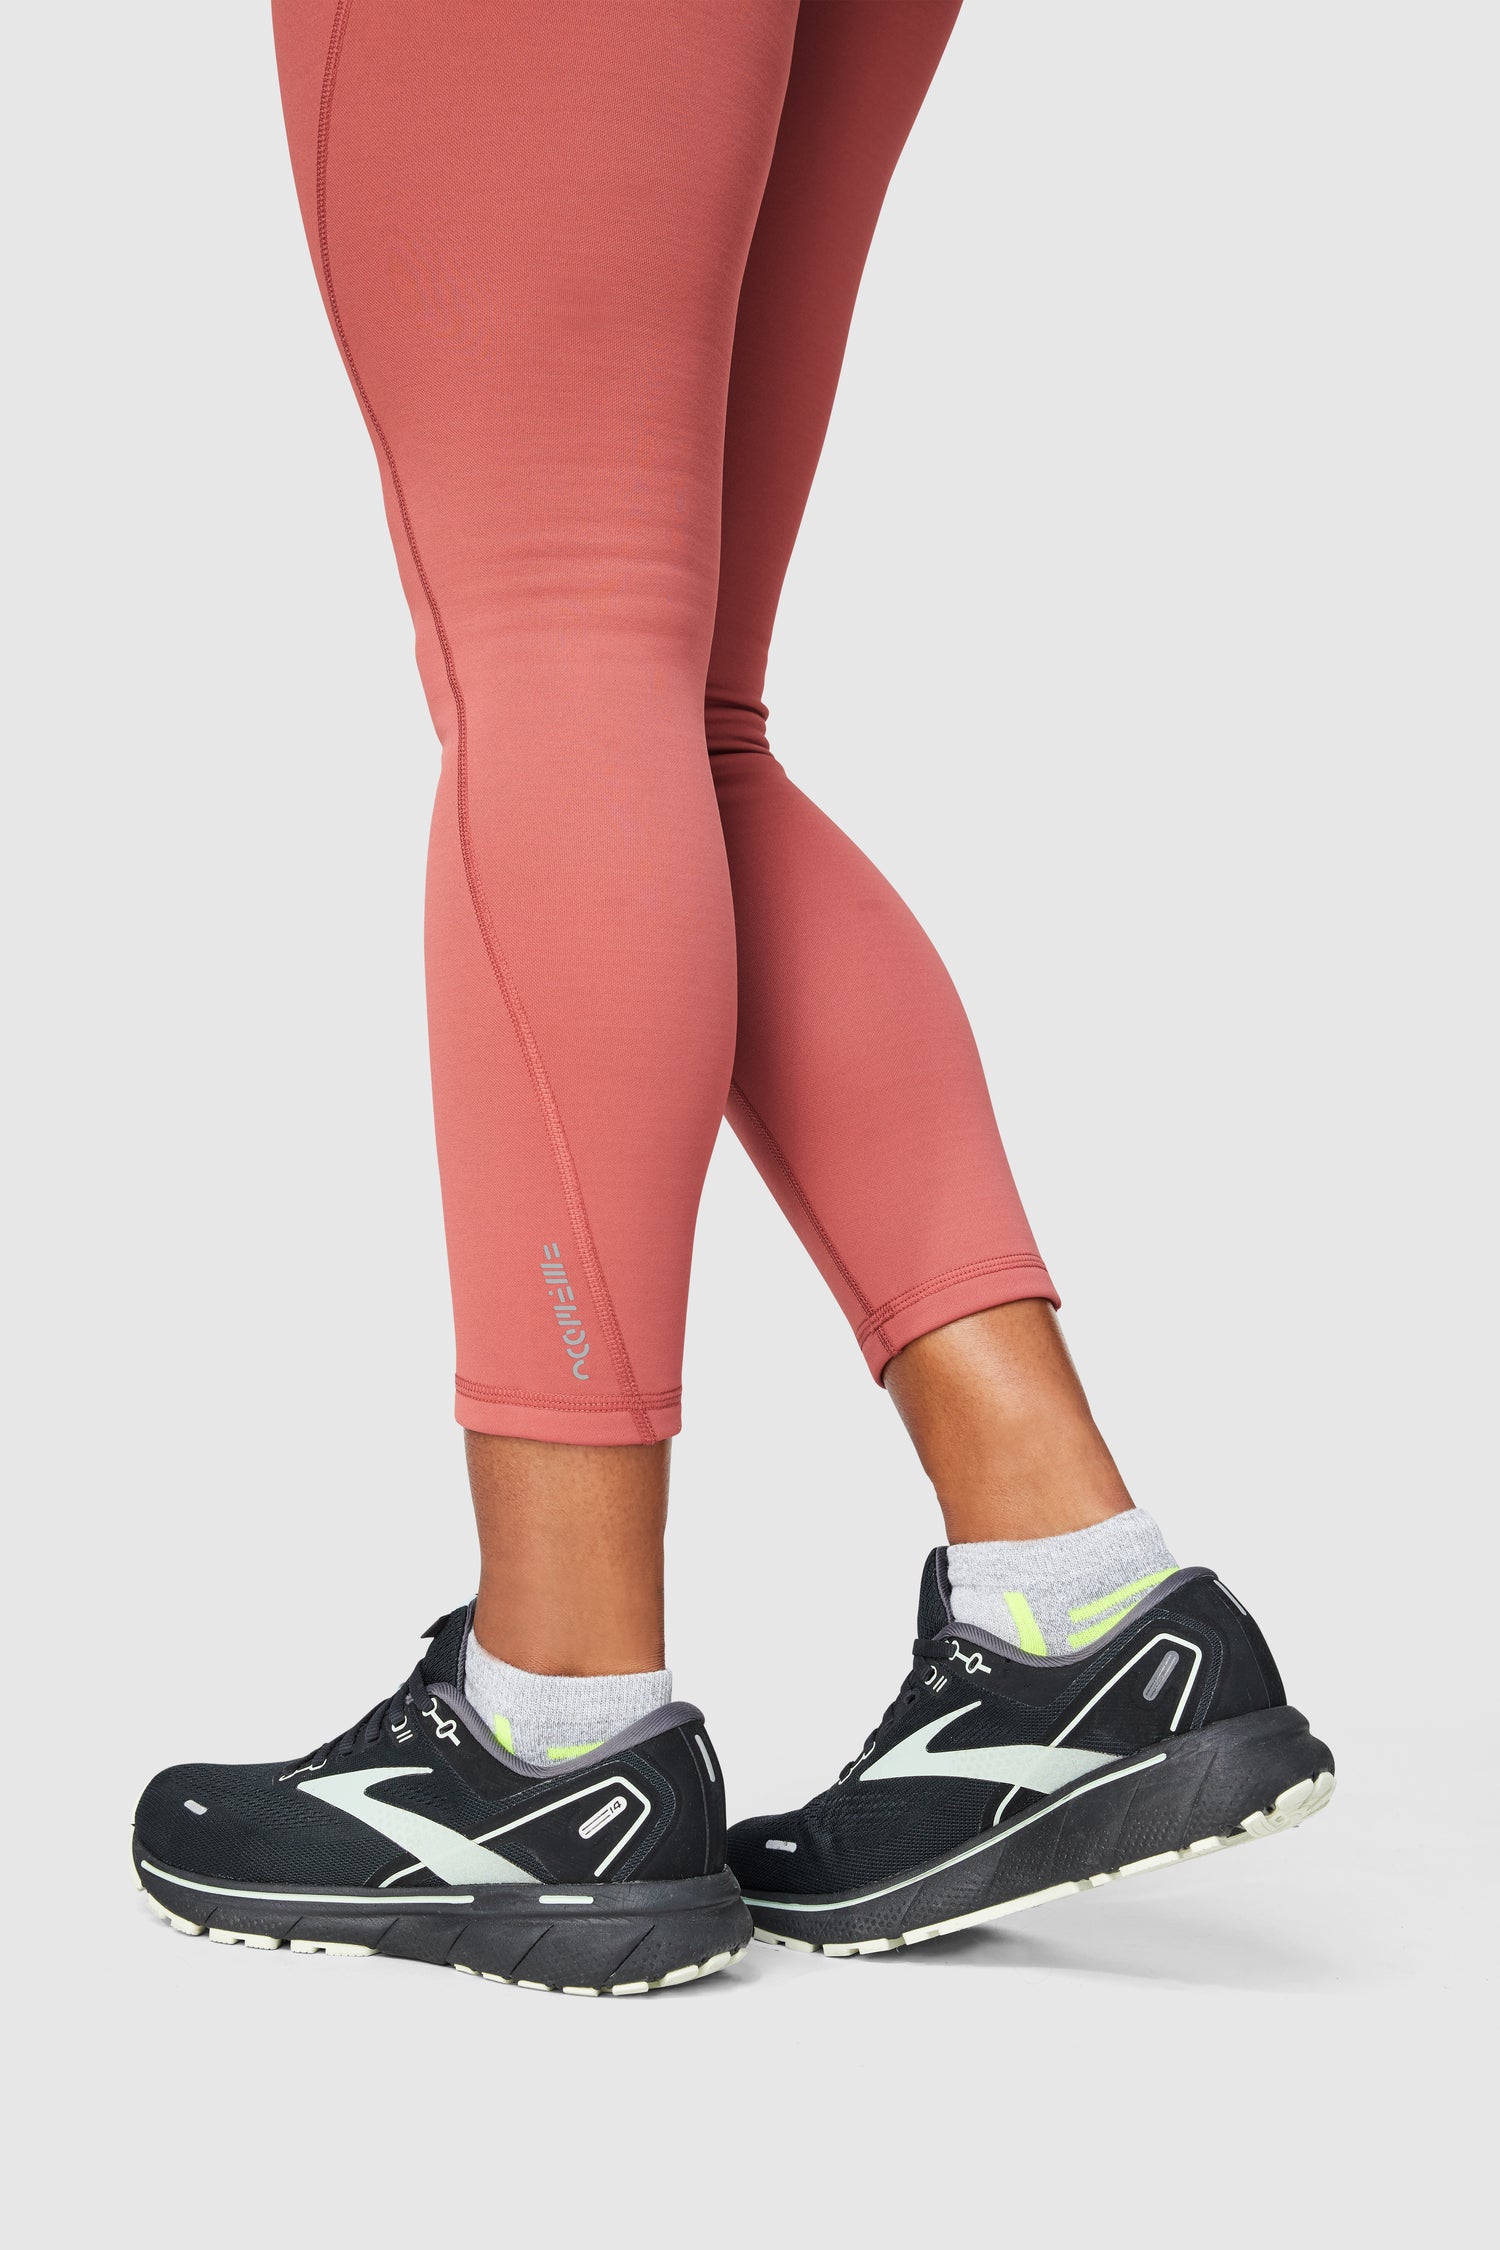 Women's Core Seamless 7/8 Tight Leggings in Hot Coral